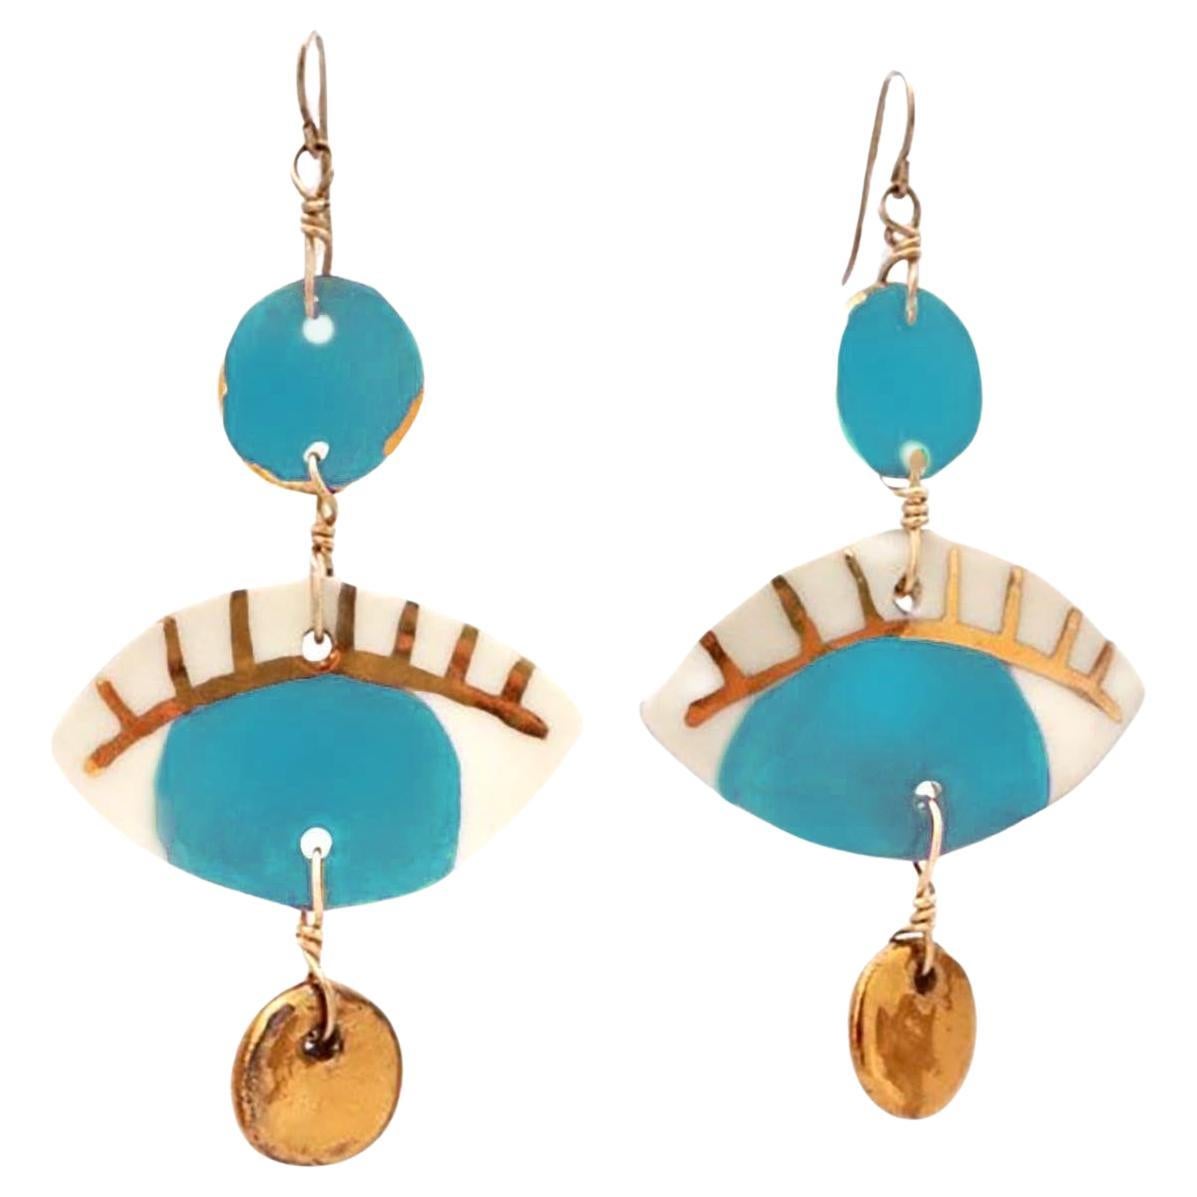 Turquoise Occhi Earrings - Handmade porcelain with 14k gold leaf detail For Sale